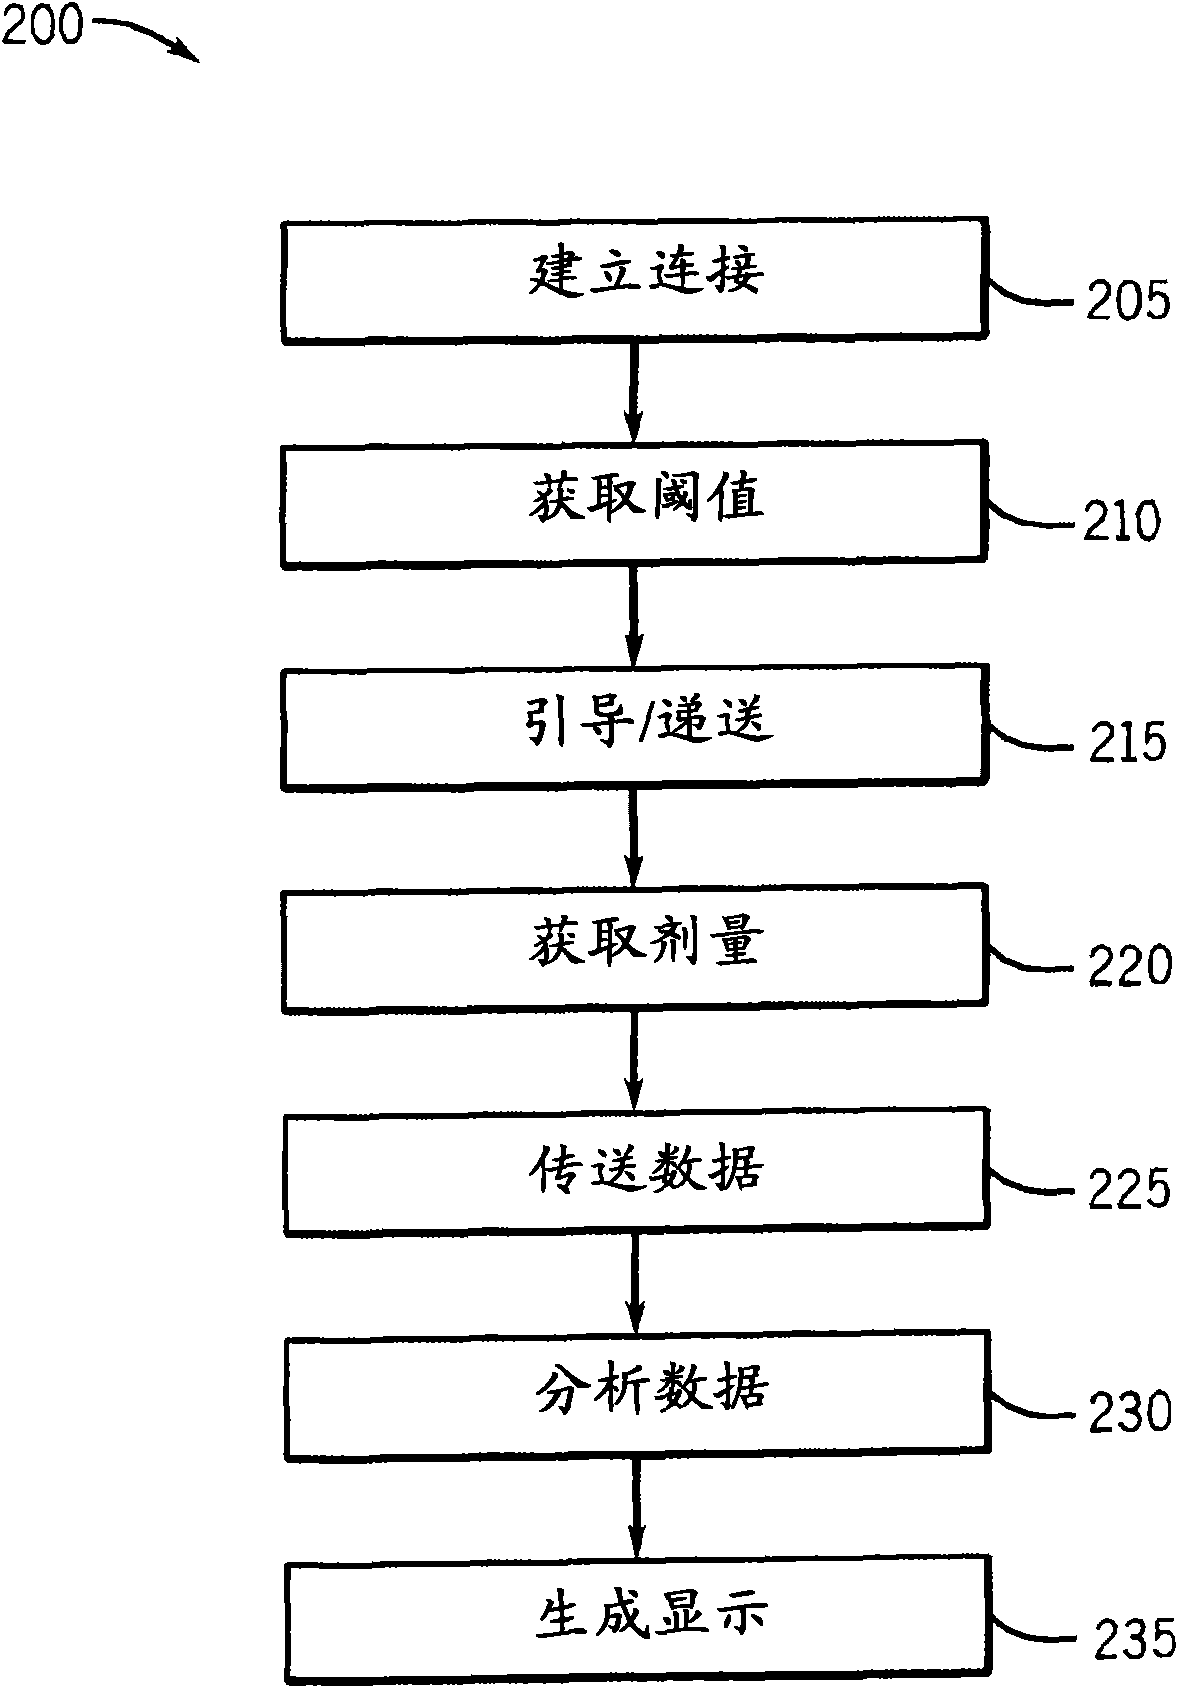 System and method of remote reporting of radiation dose usage in image acquisition